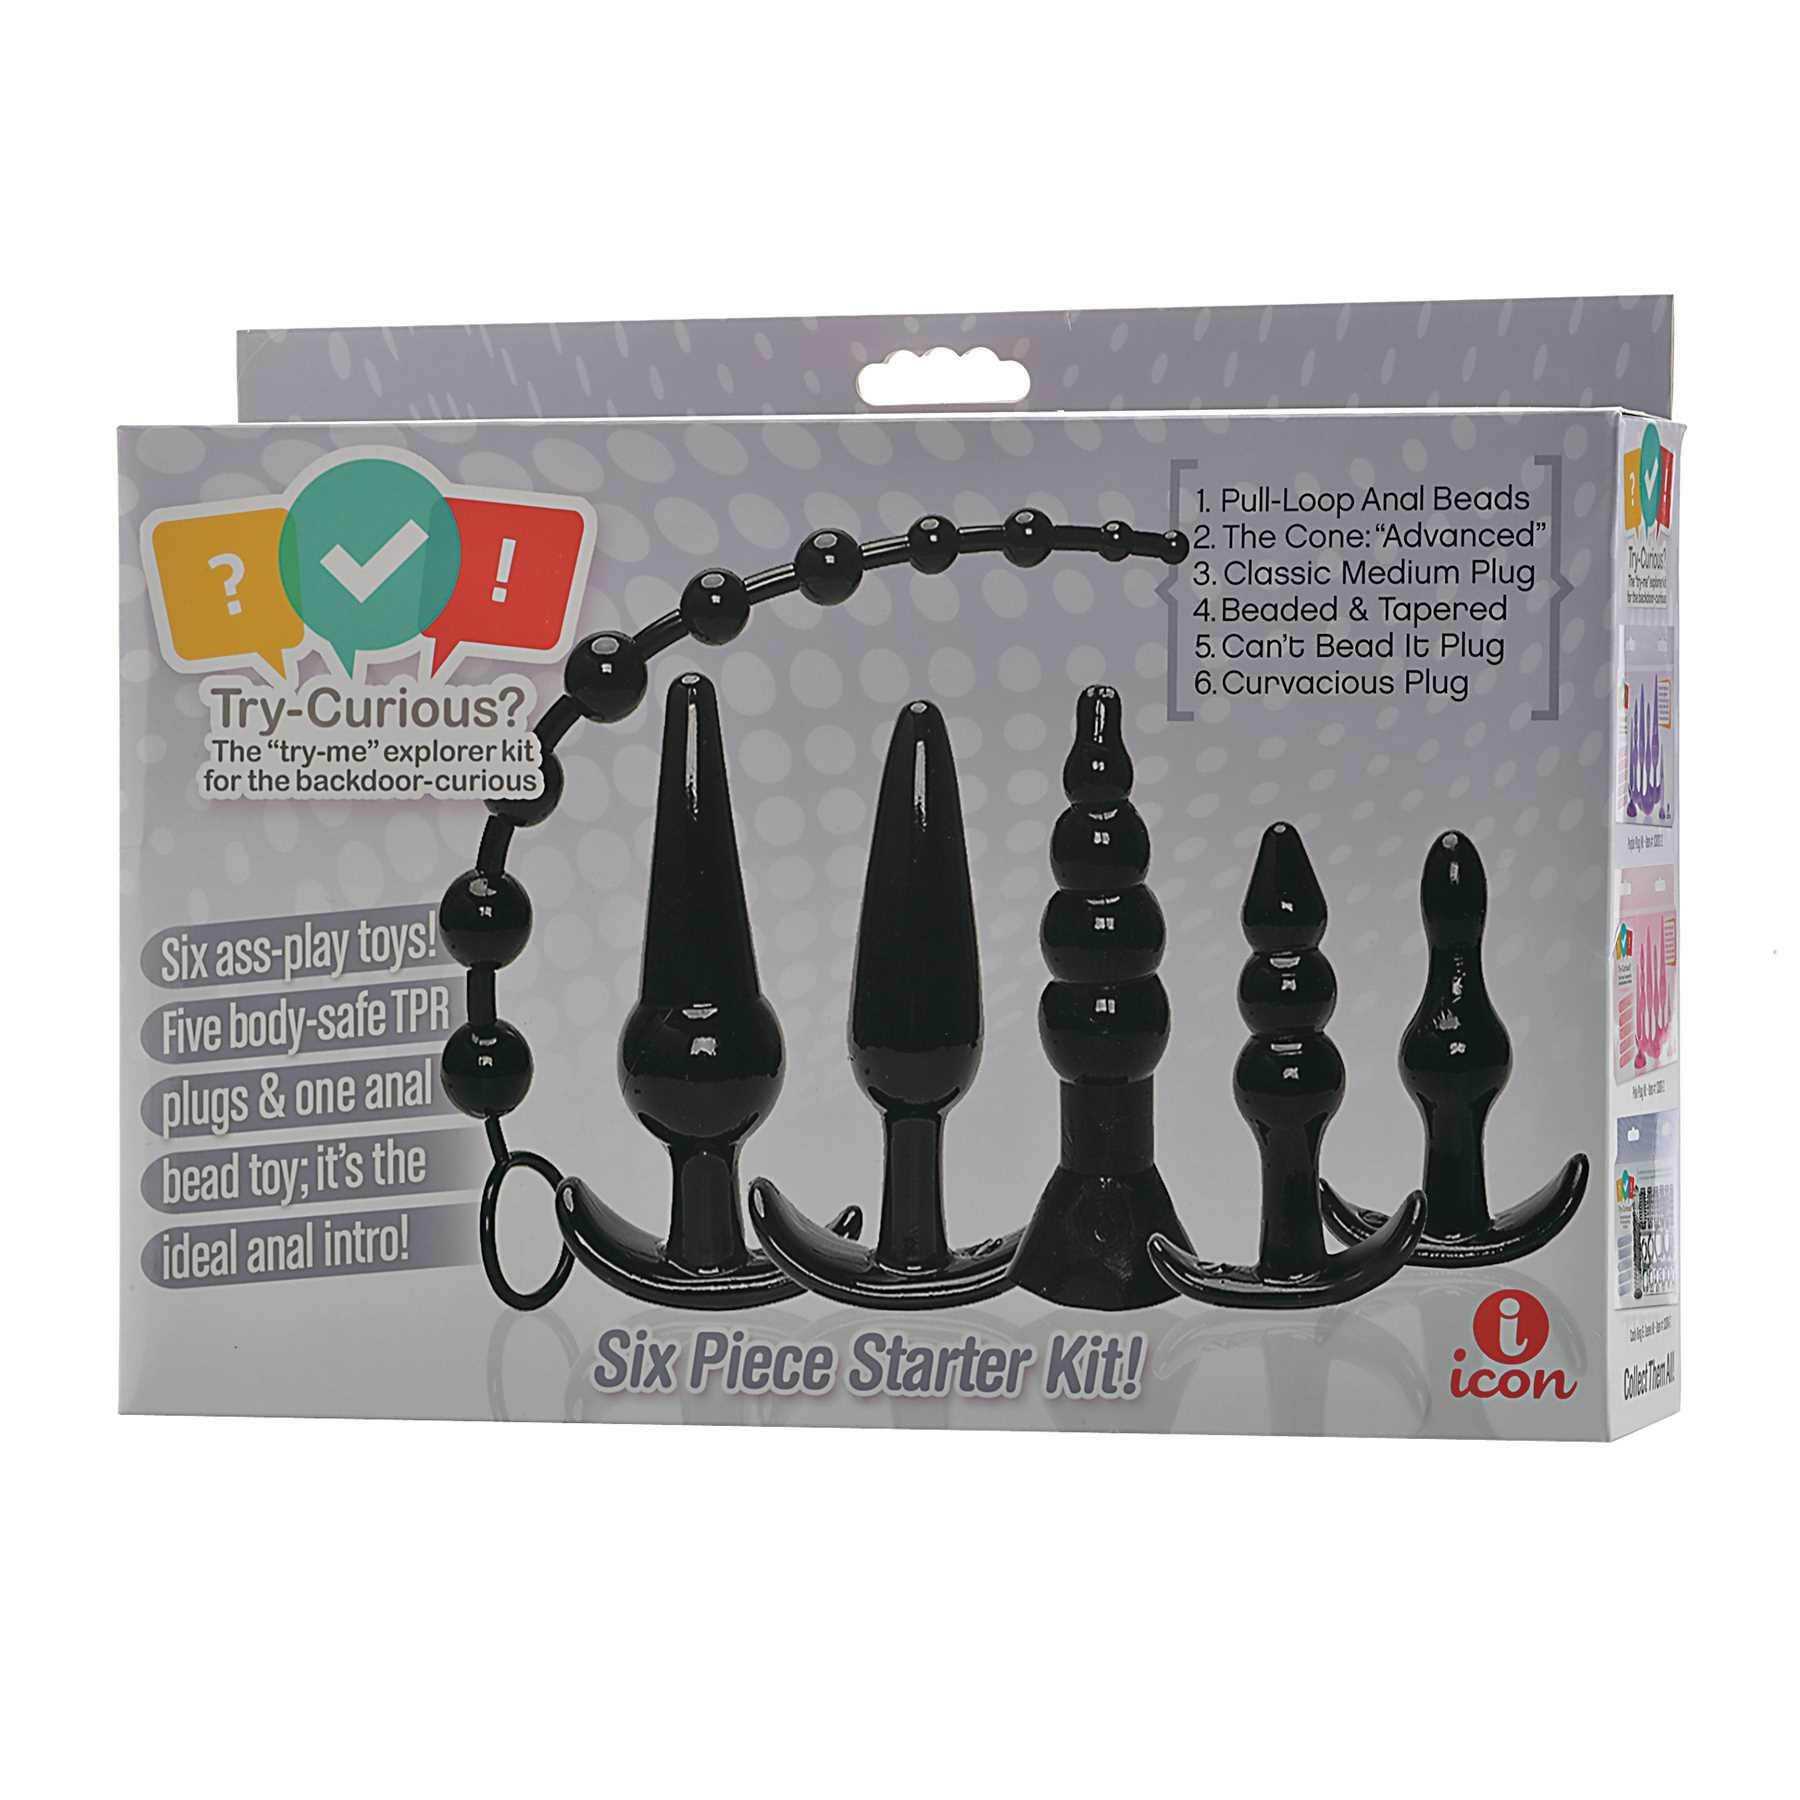 Try-Curious Anal Plug Kit box packaging